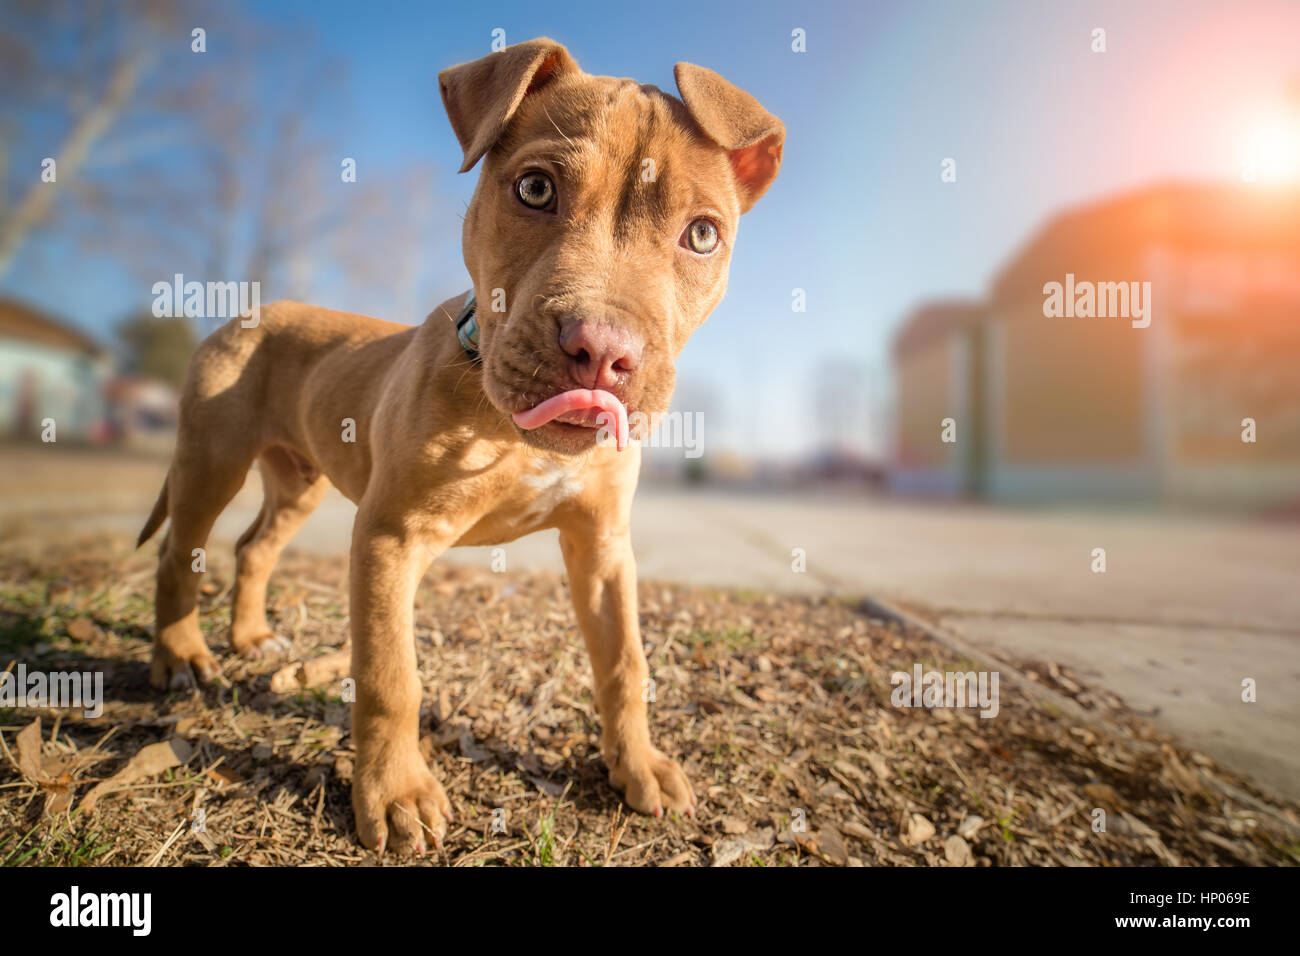 Cute American pit bull terrier pup Stock Photo